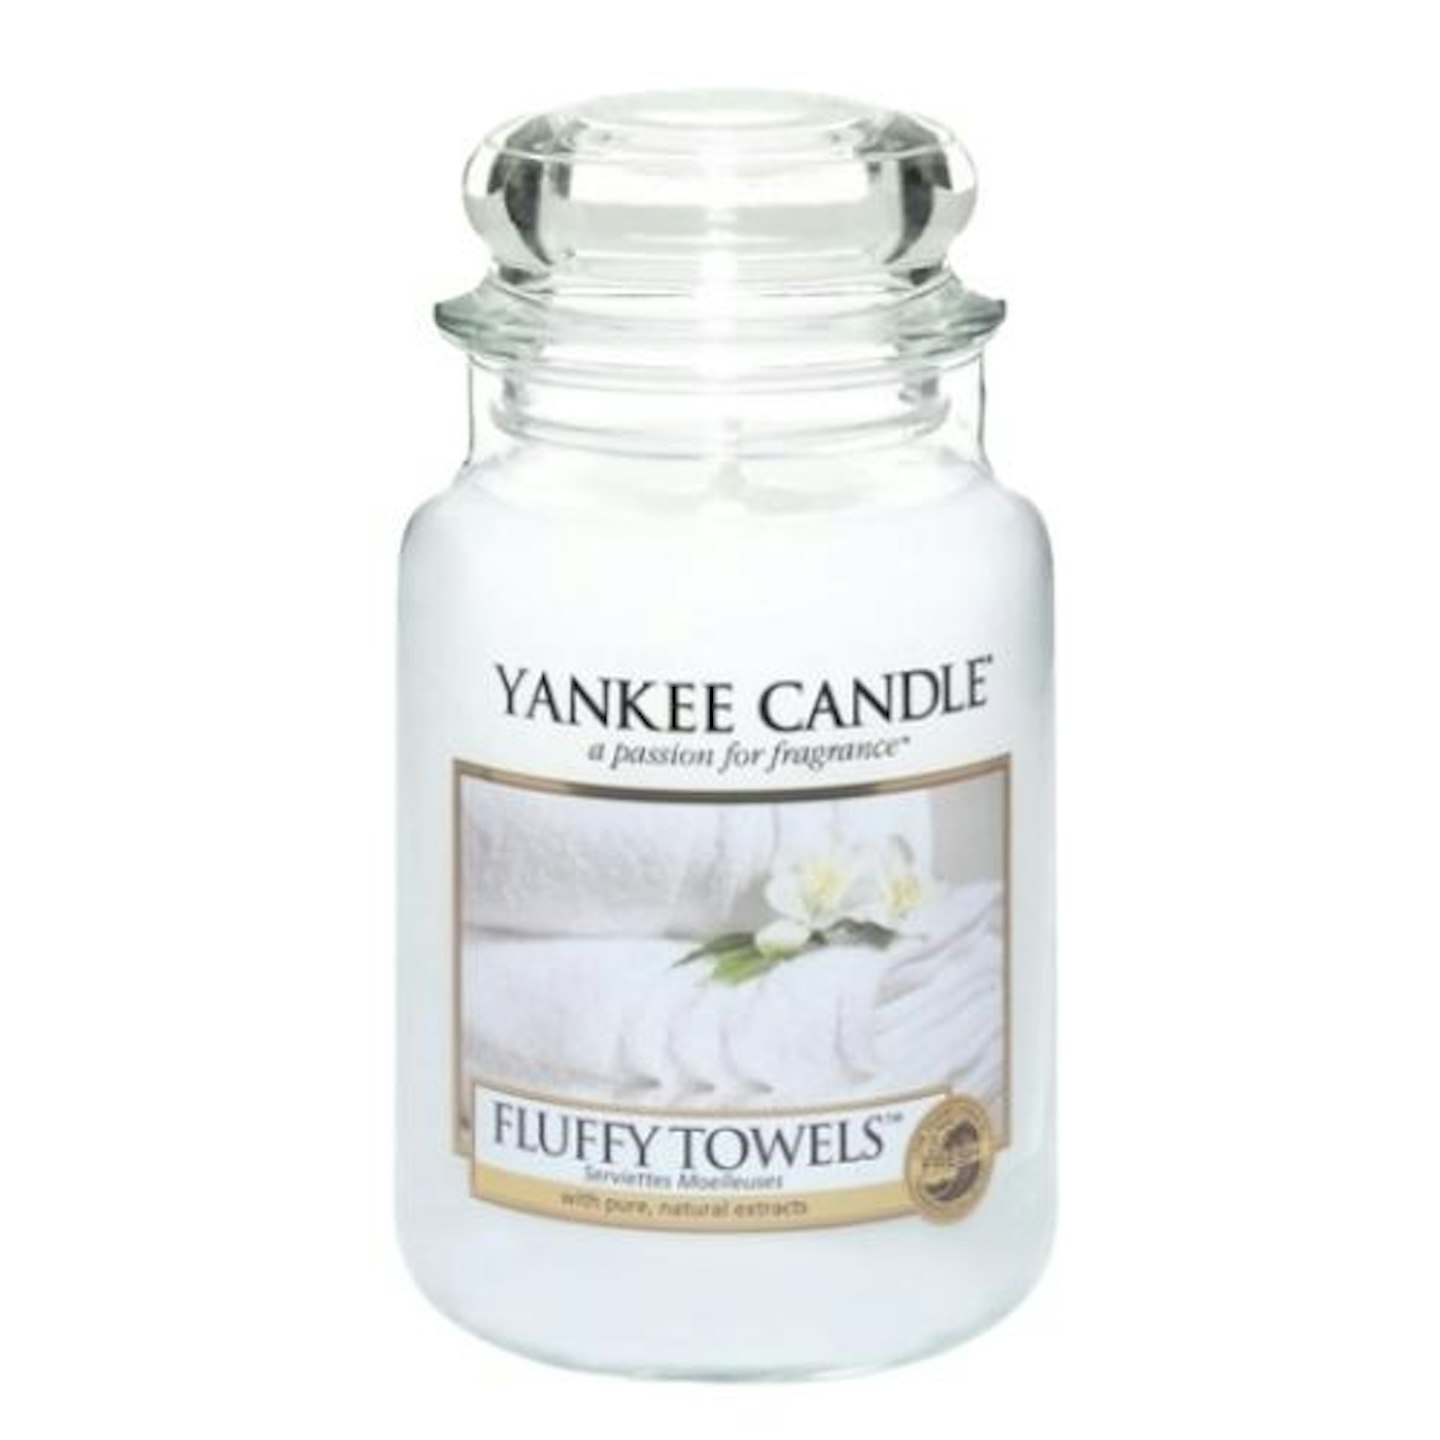 Fluffy Towels Large Jar Candle